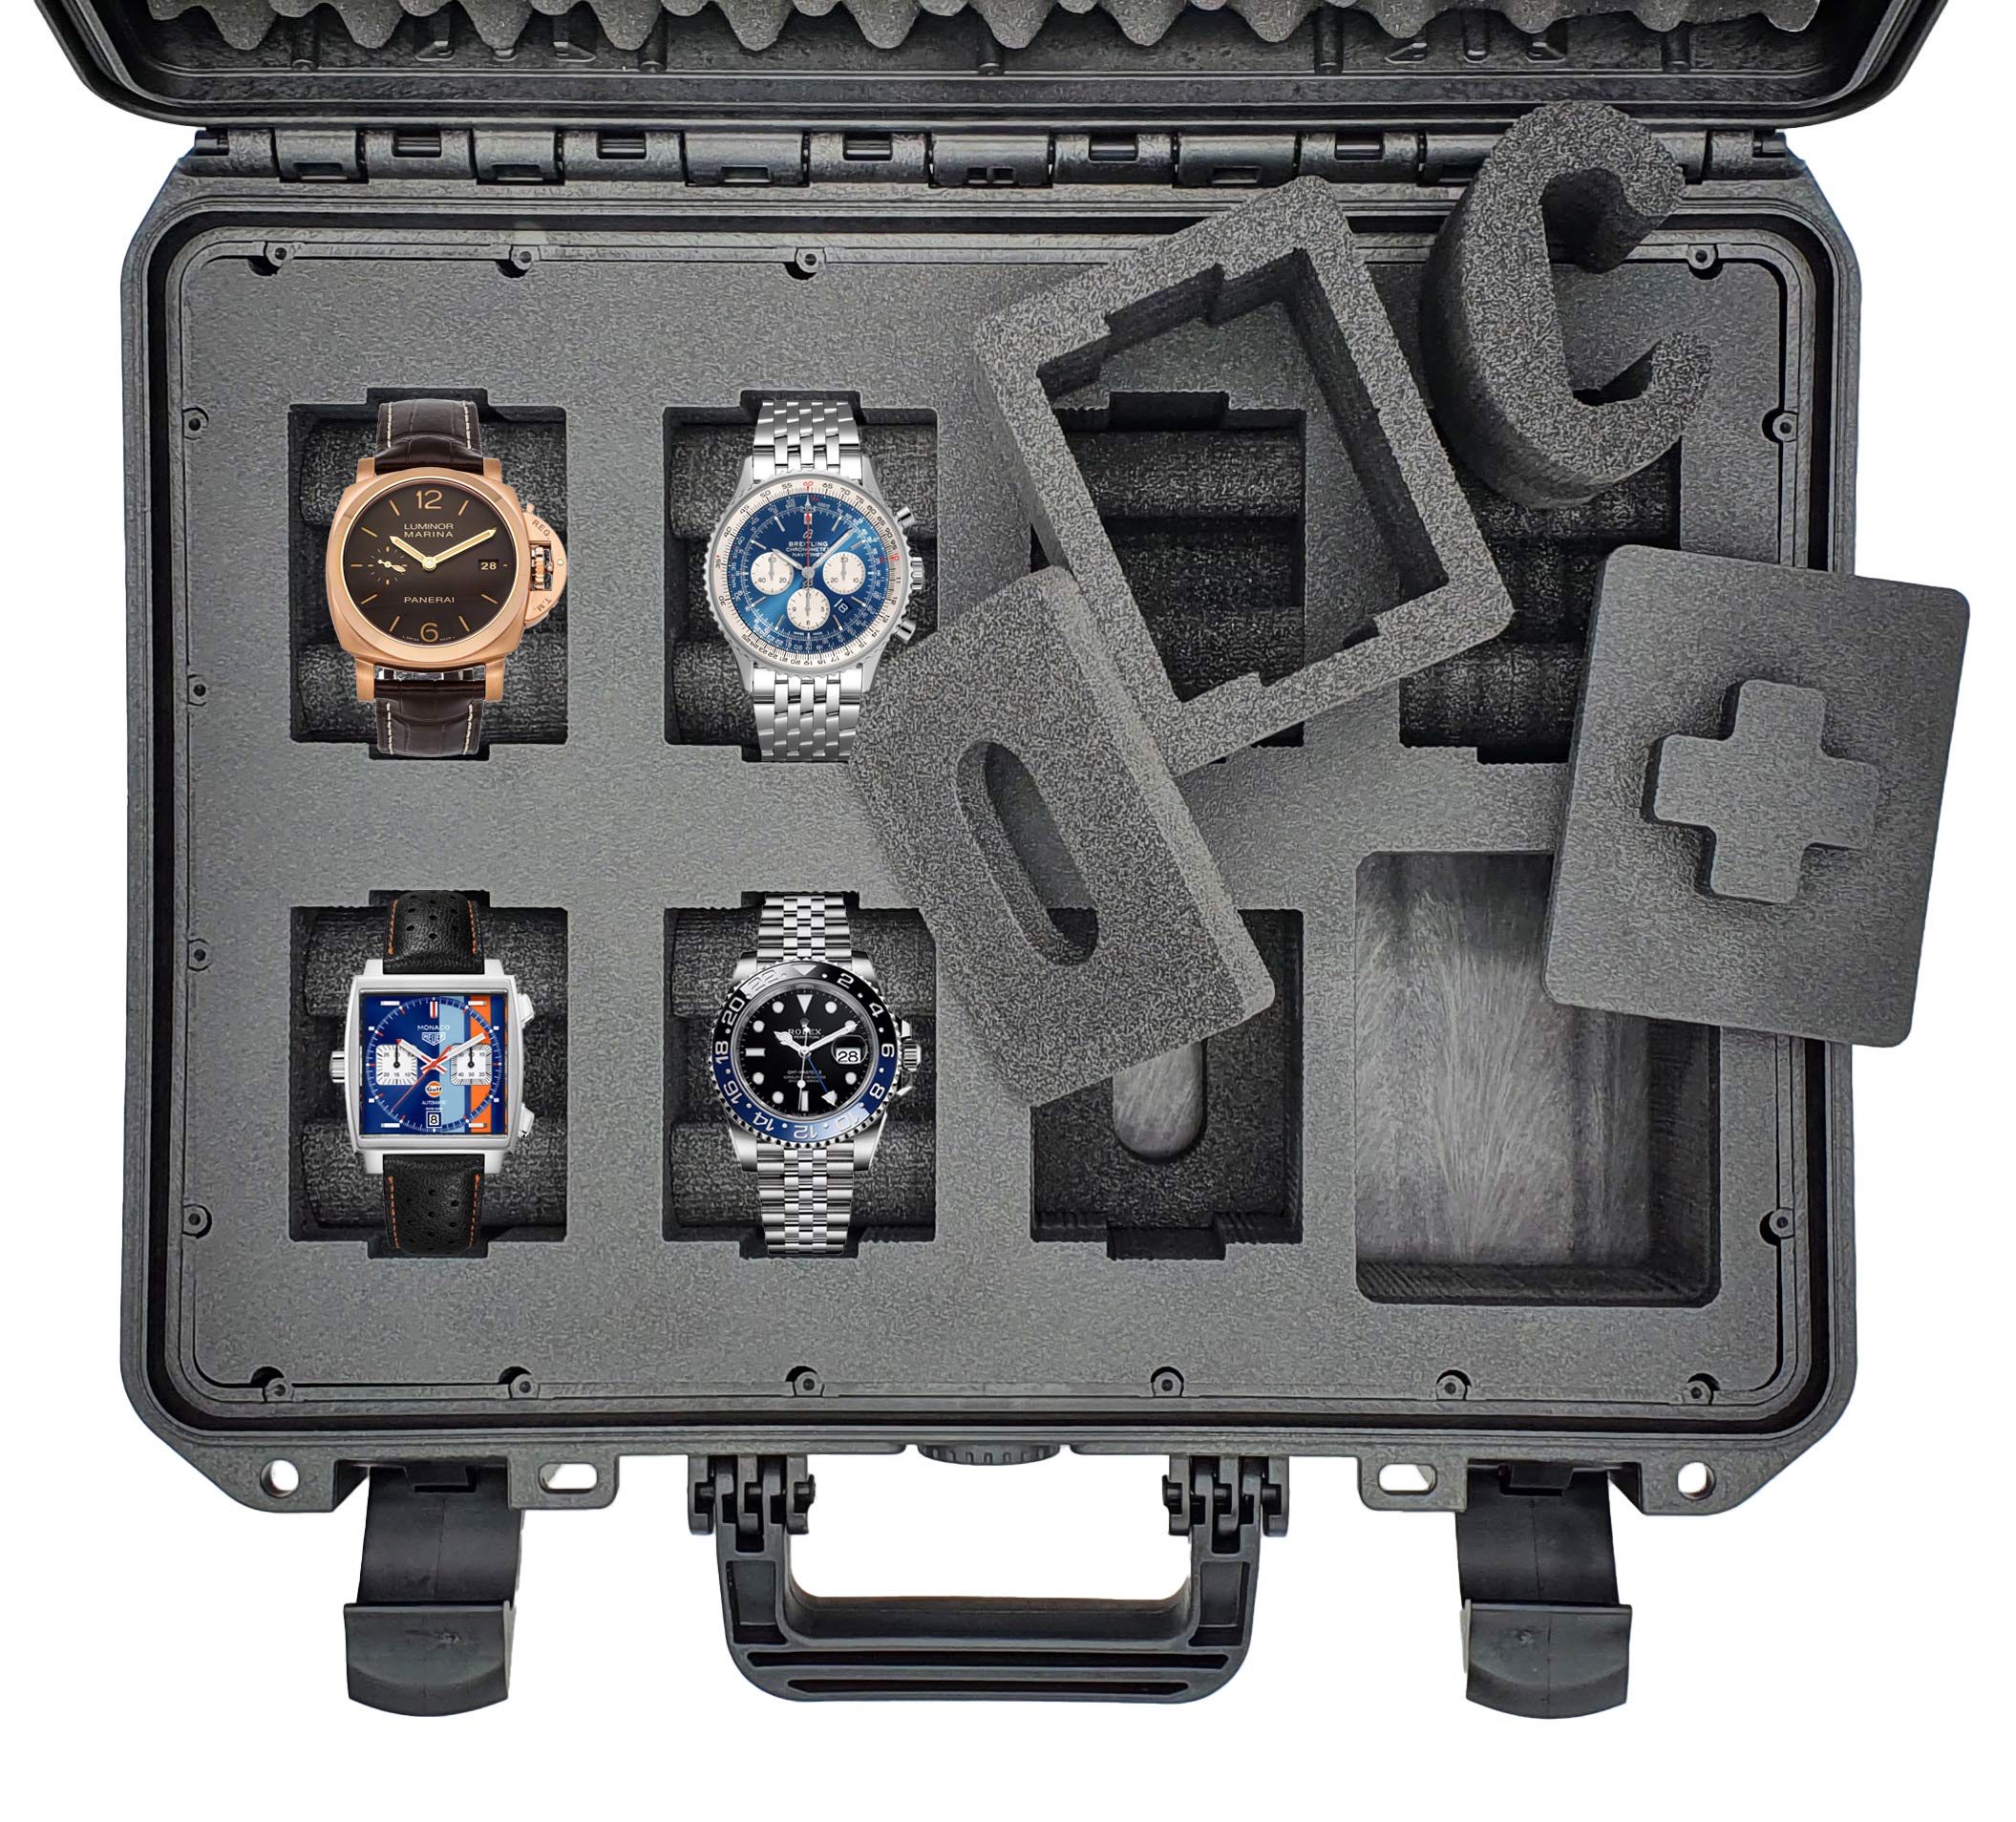 mc-cases® - Watch Case - Transport Hard Case for up to 8 Watches - Travel Case - Waterproof - Lockable - Perfect for Travel and Storage - Extreme Protection - Made in Germany